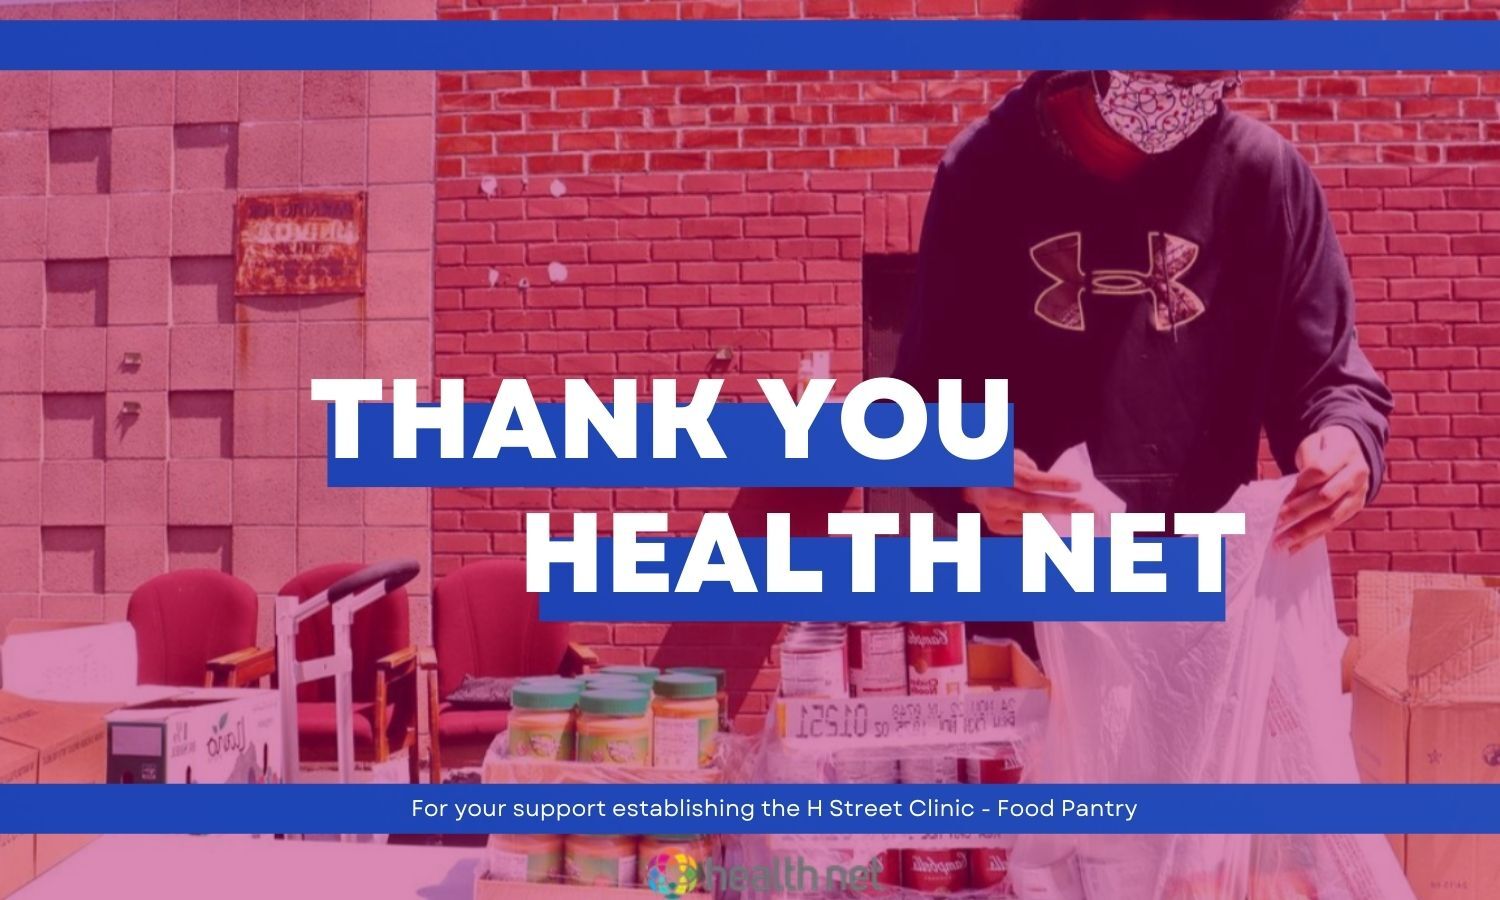 Thank you Health Net for your recent grant.